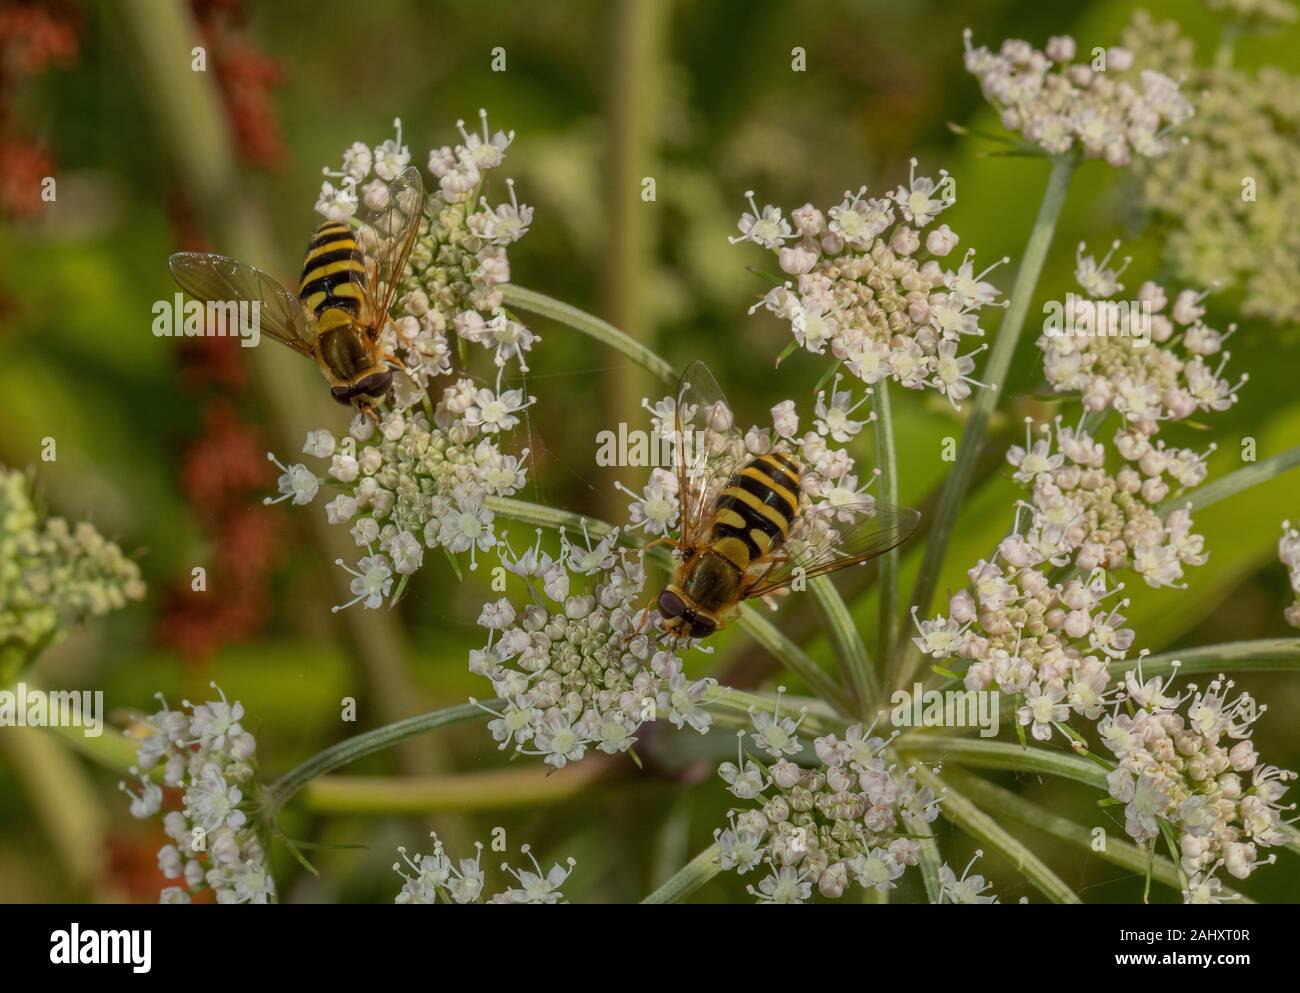 Common banded hoverflies visiting Angelica flowers for nectar. Stock Photo